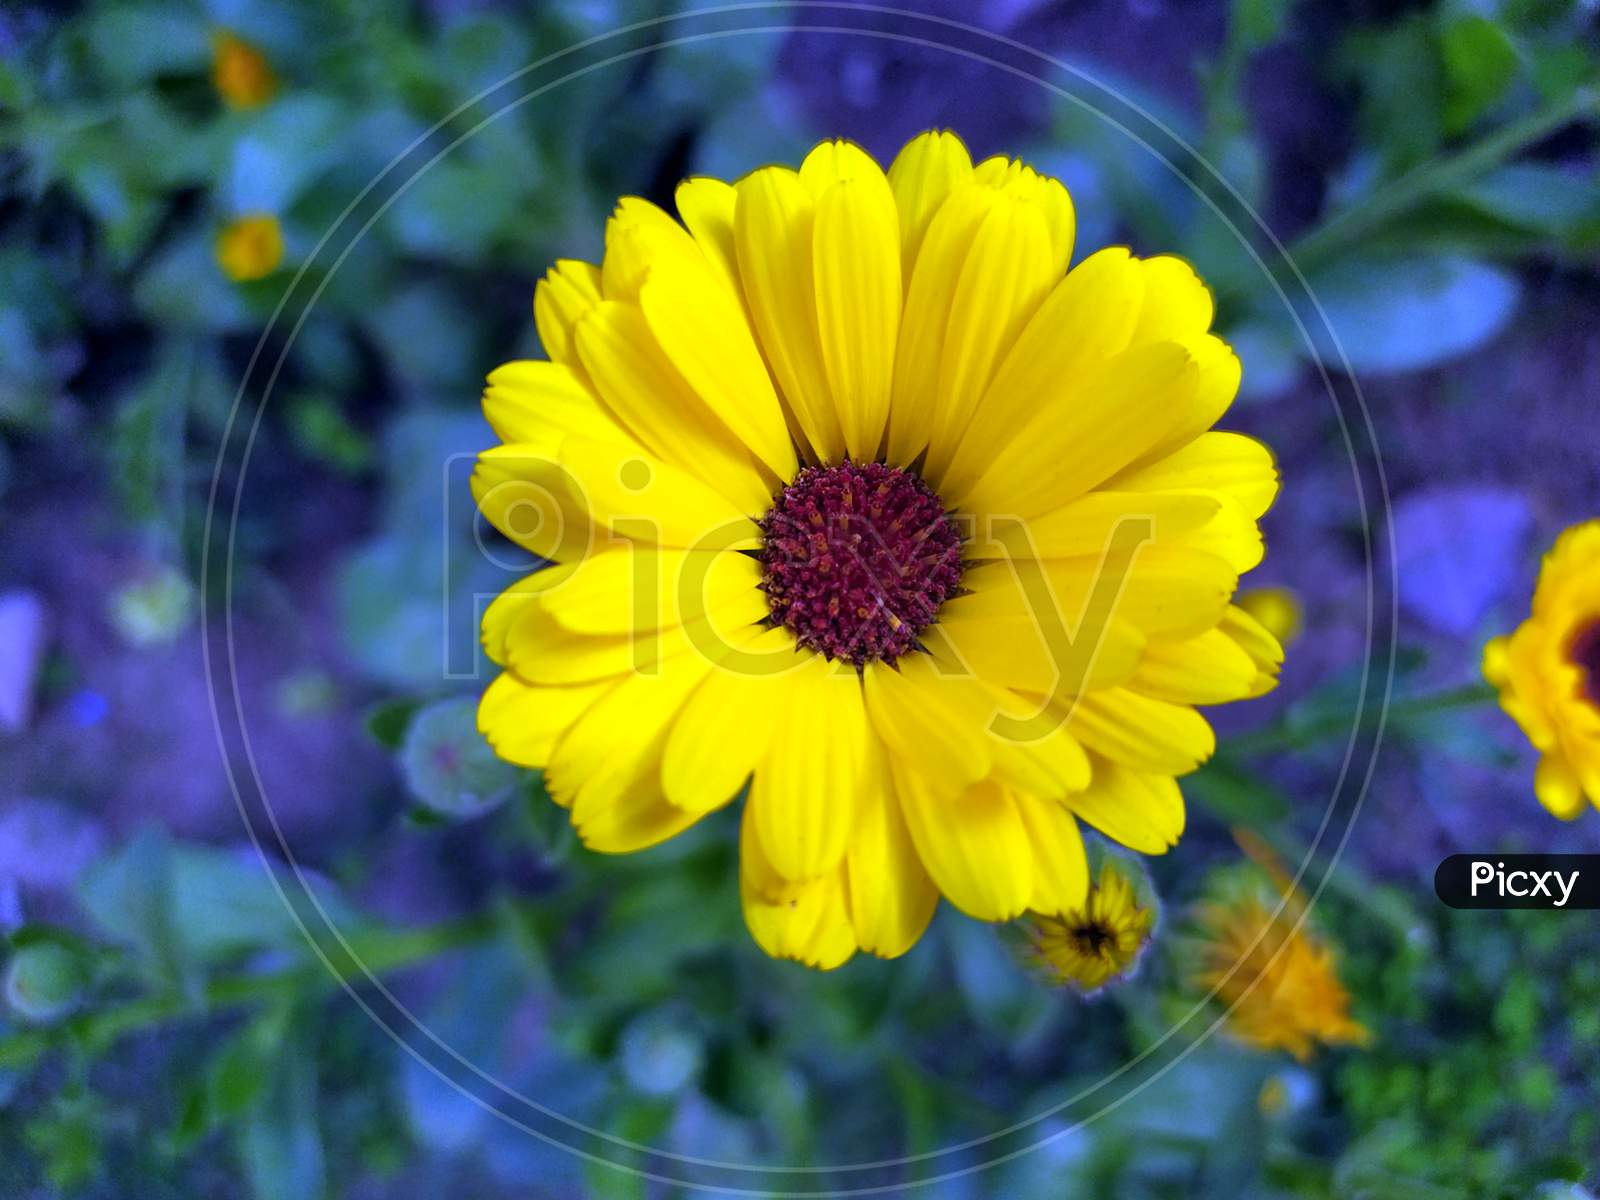 a yellow flower blooming